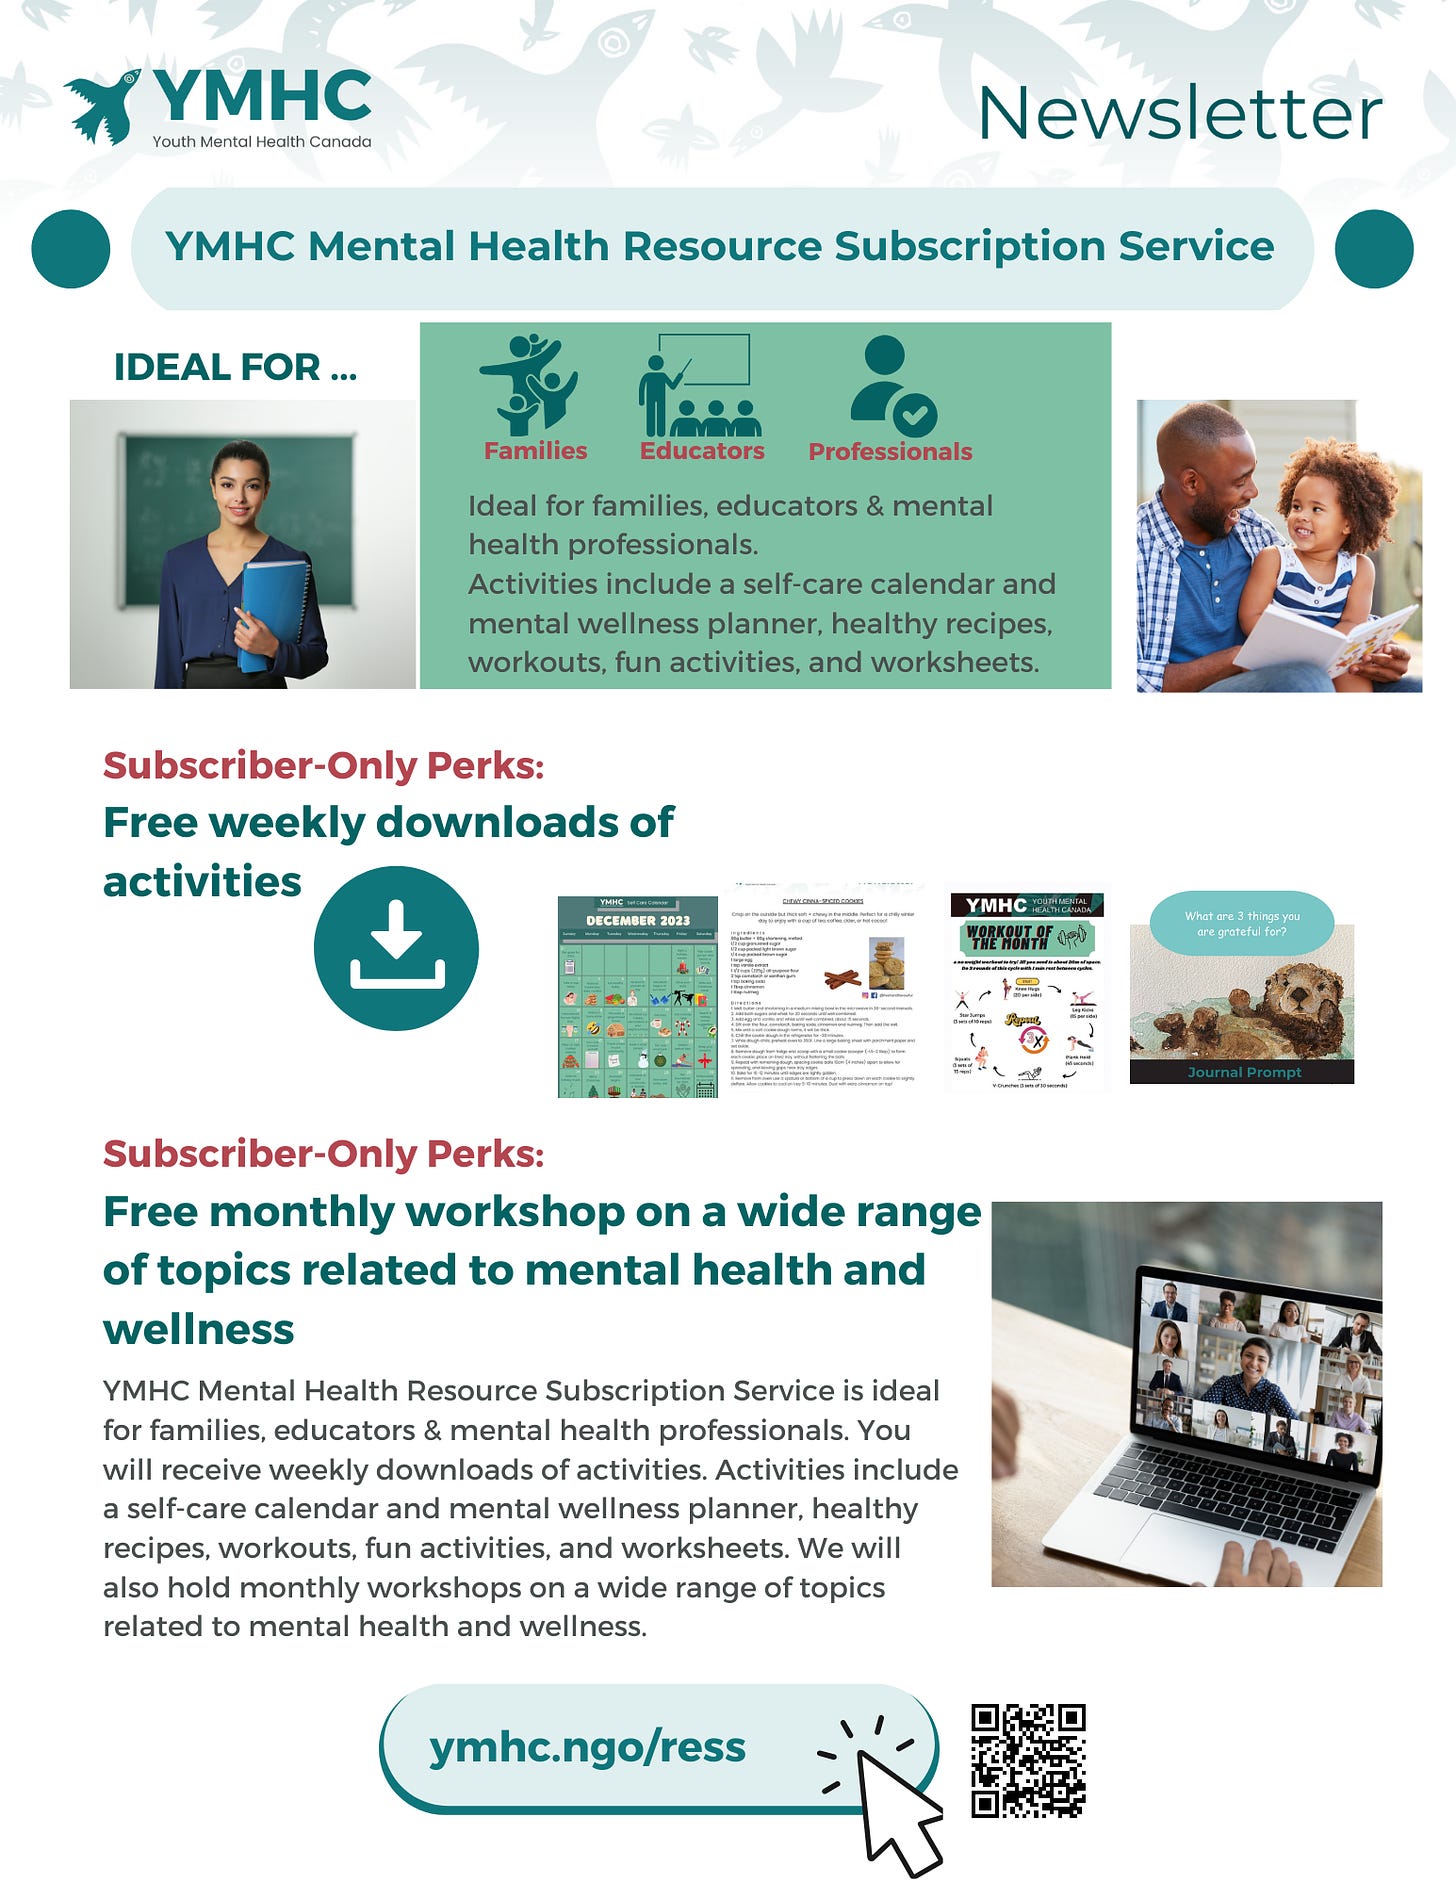 YMHC Mental Health Resource Subscription Service